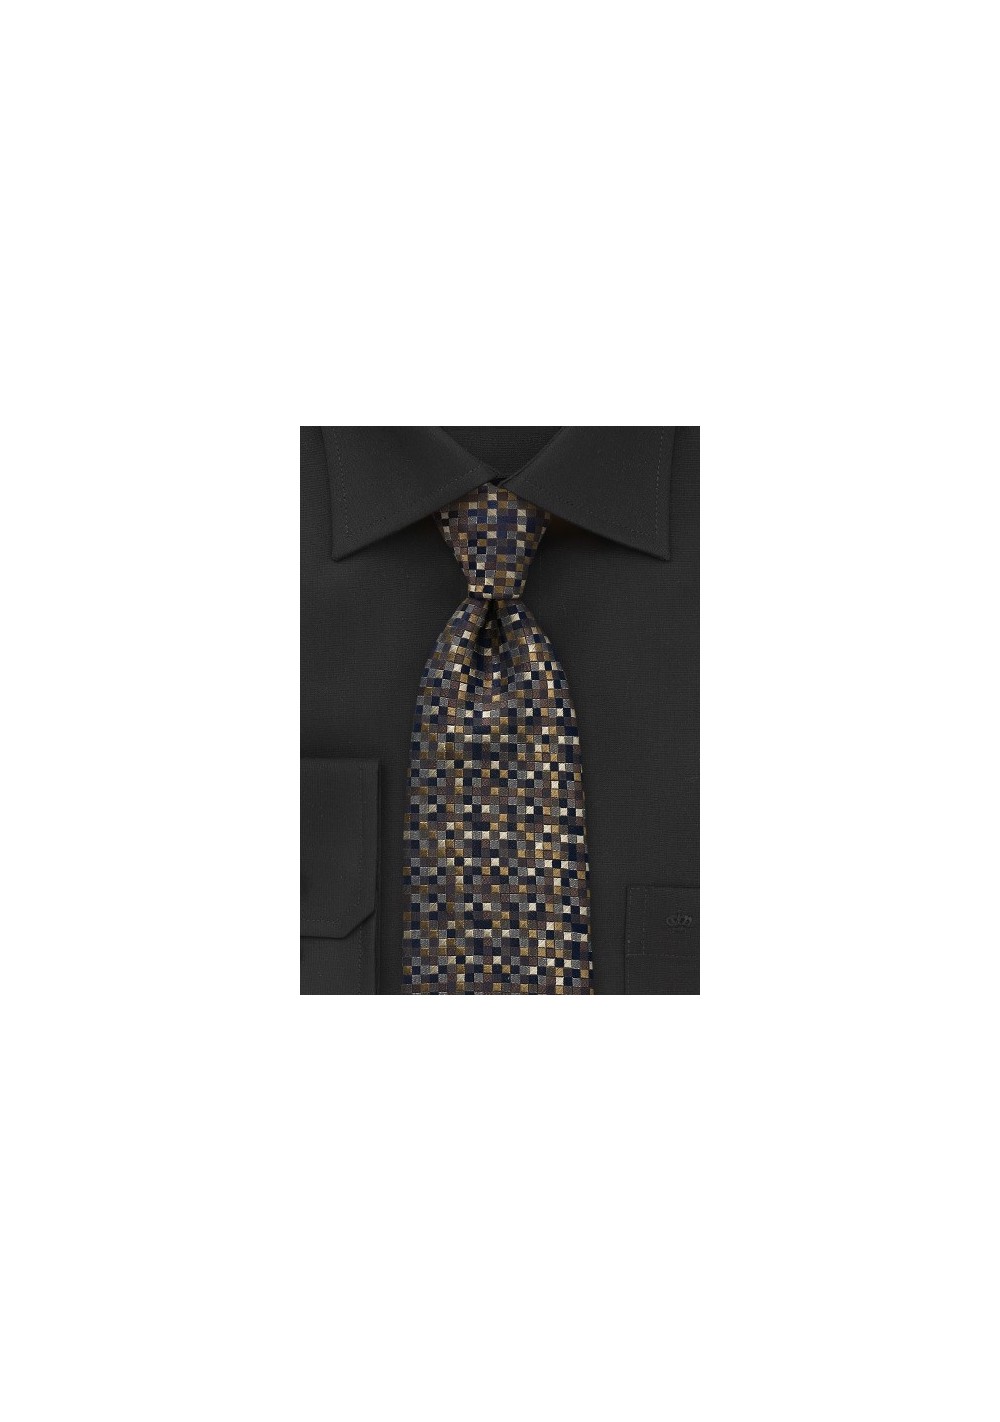 Square Patterned Tie in Navy and Gold